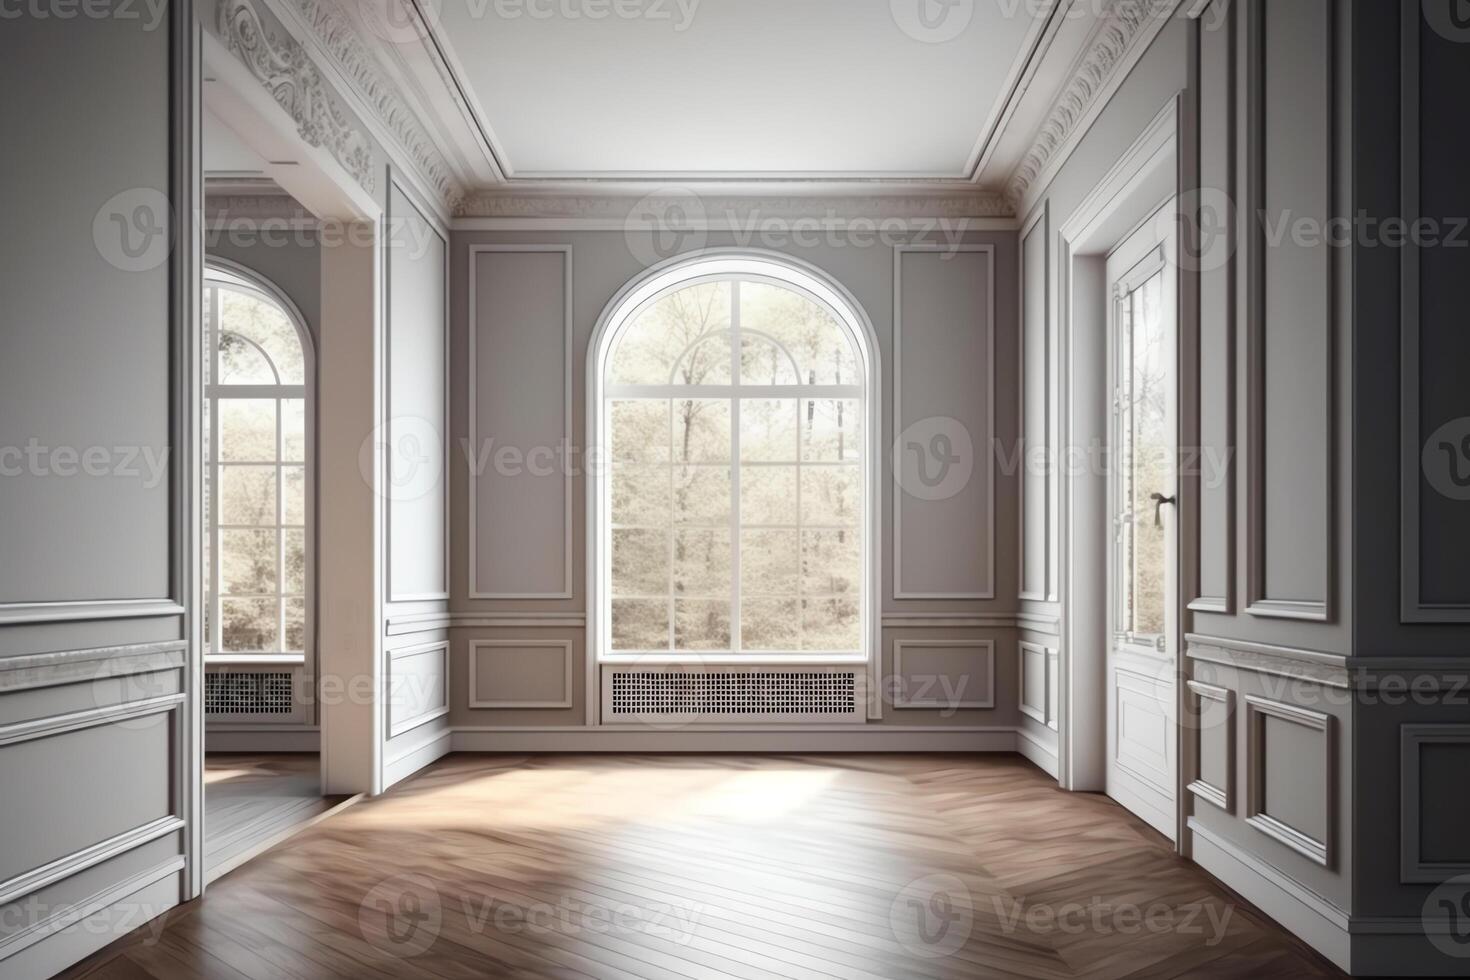 Classical Empty Room Interior Rooms Have Stock Photo 2260652811 |  Shutterstock